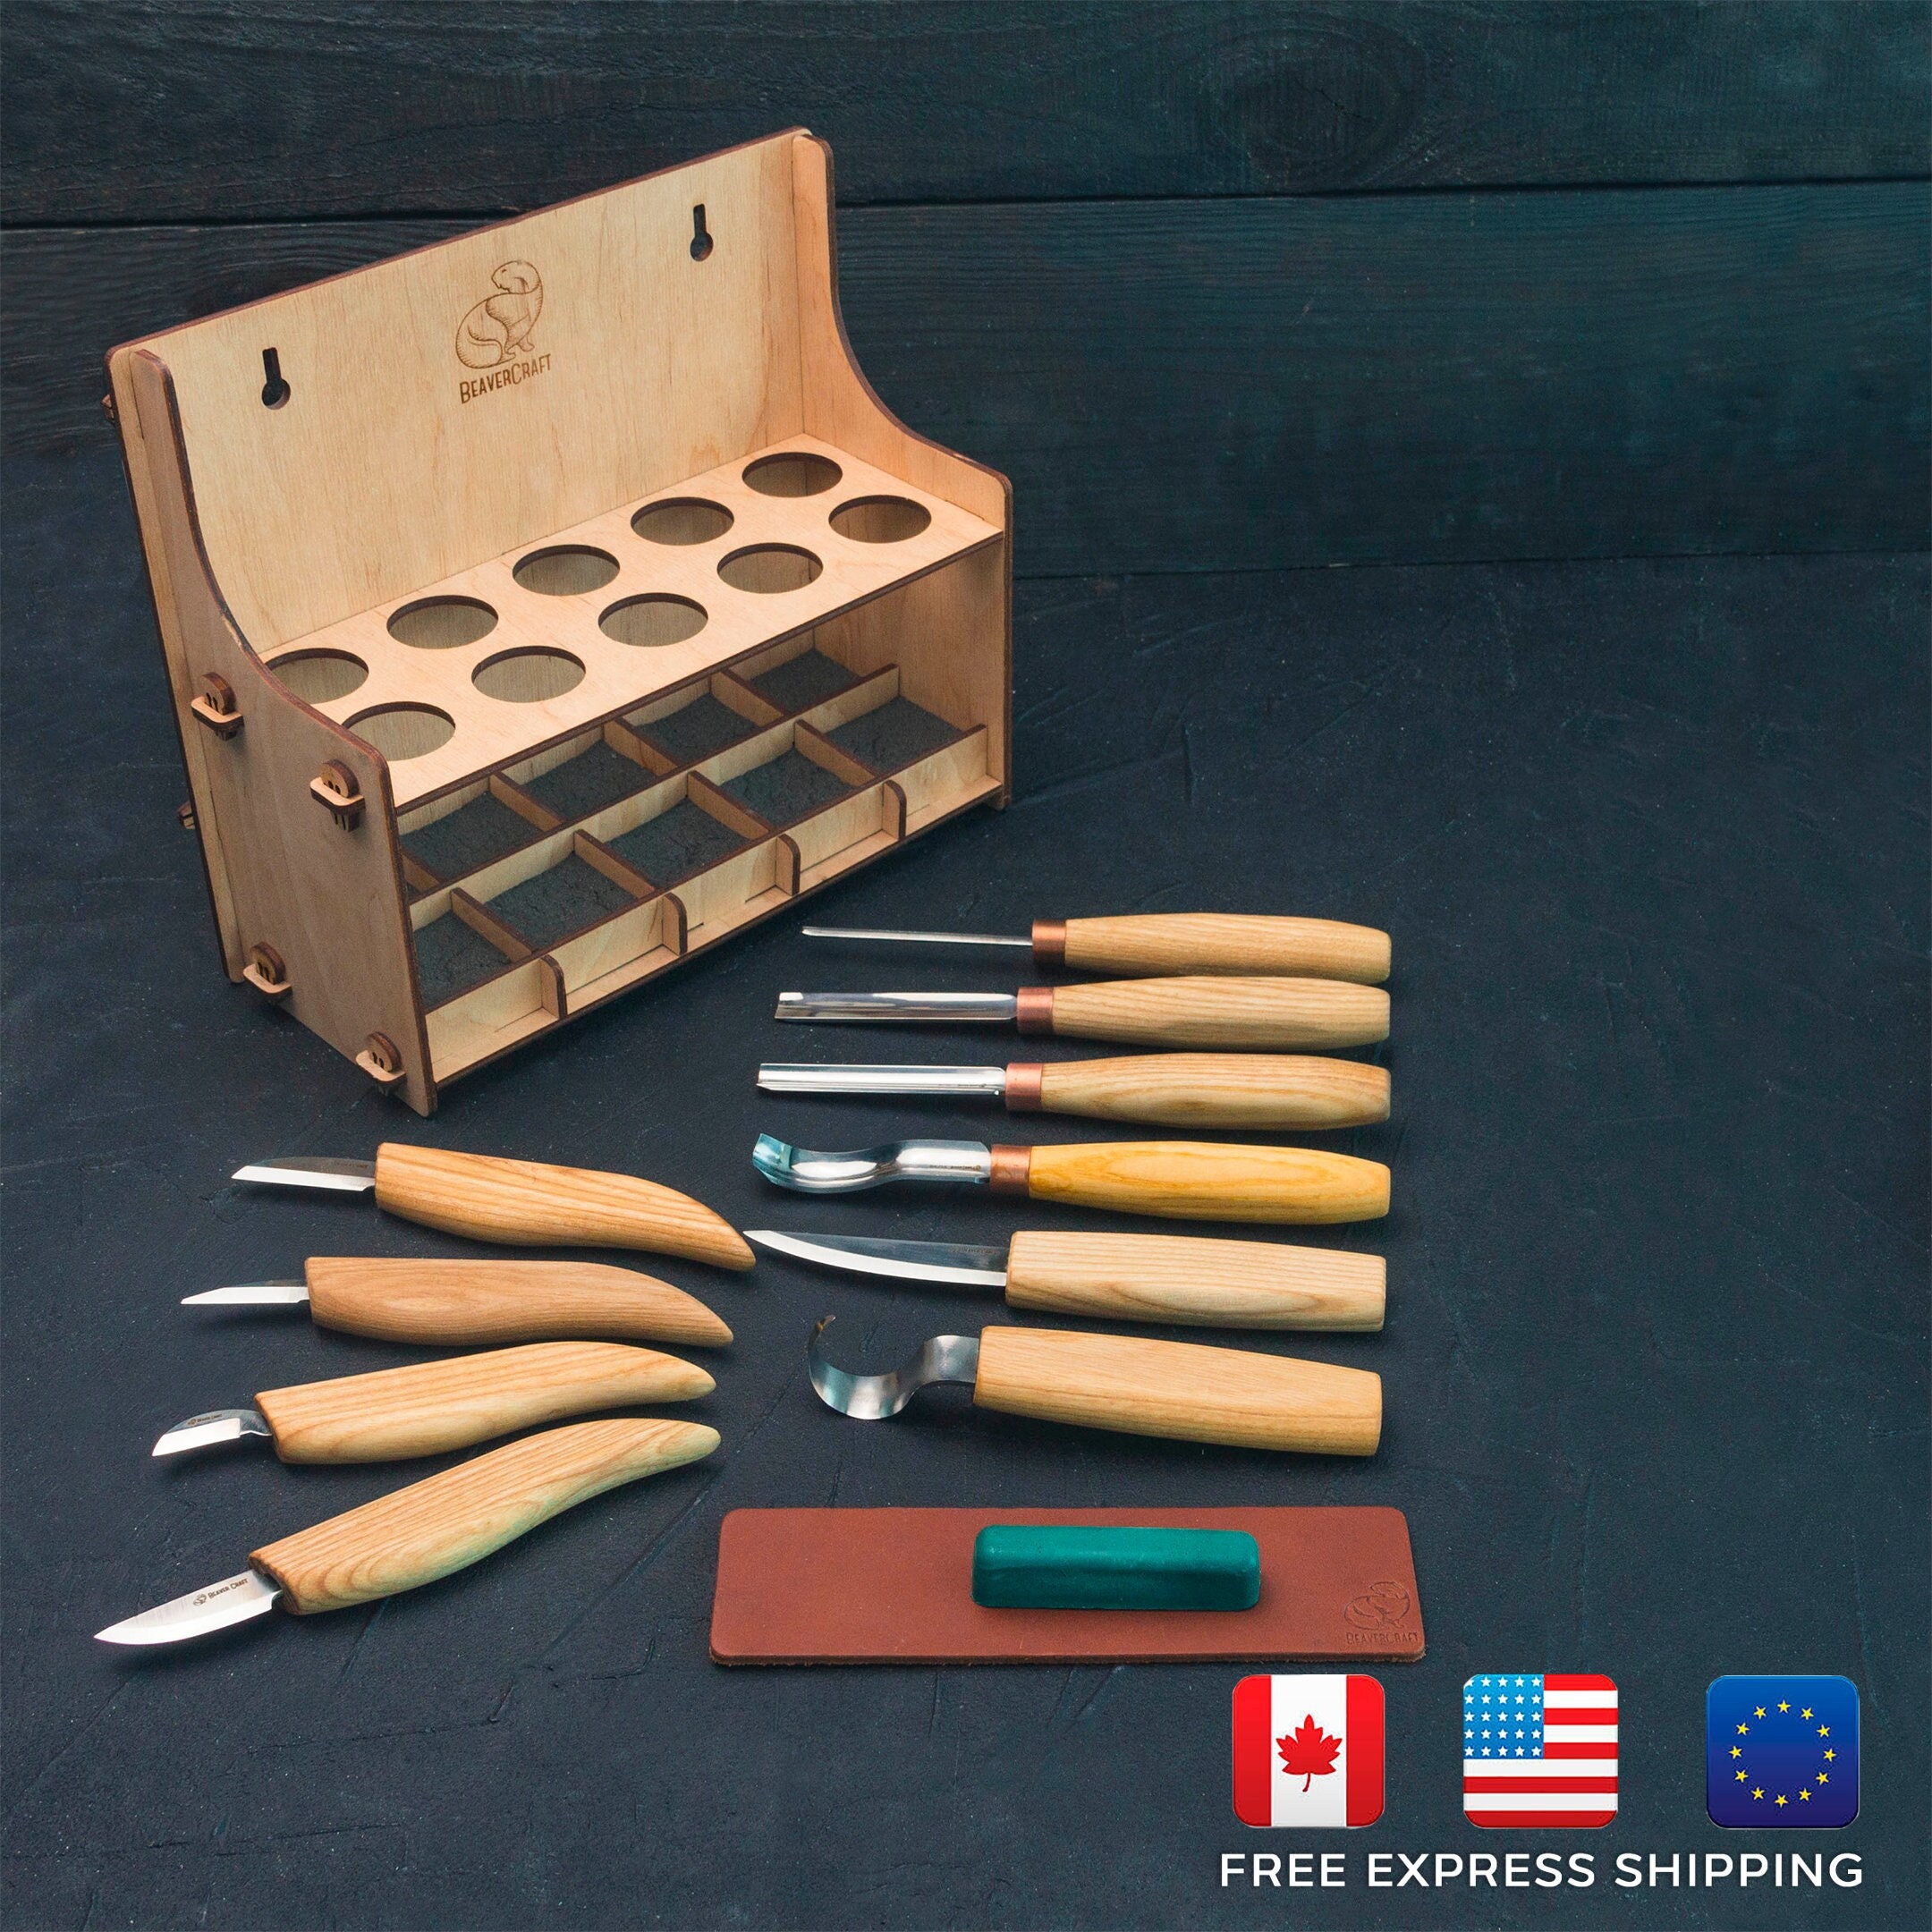 Profi Woodcarving Tools Set for Geometric Carving, Handmade Wood Item,  Original Pattern, Tools for Hobby, Woodworking Supply, Gift for Carve 